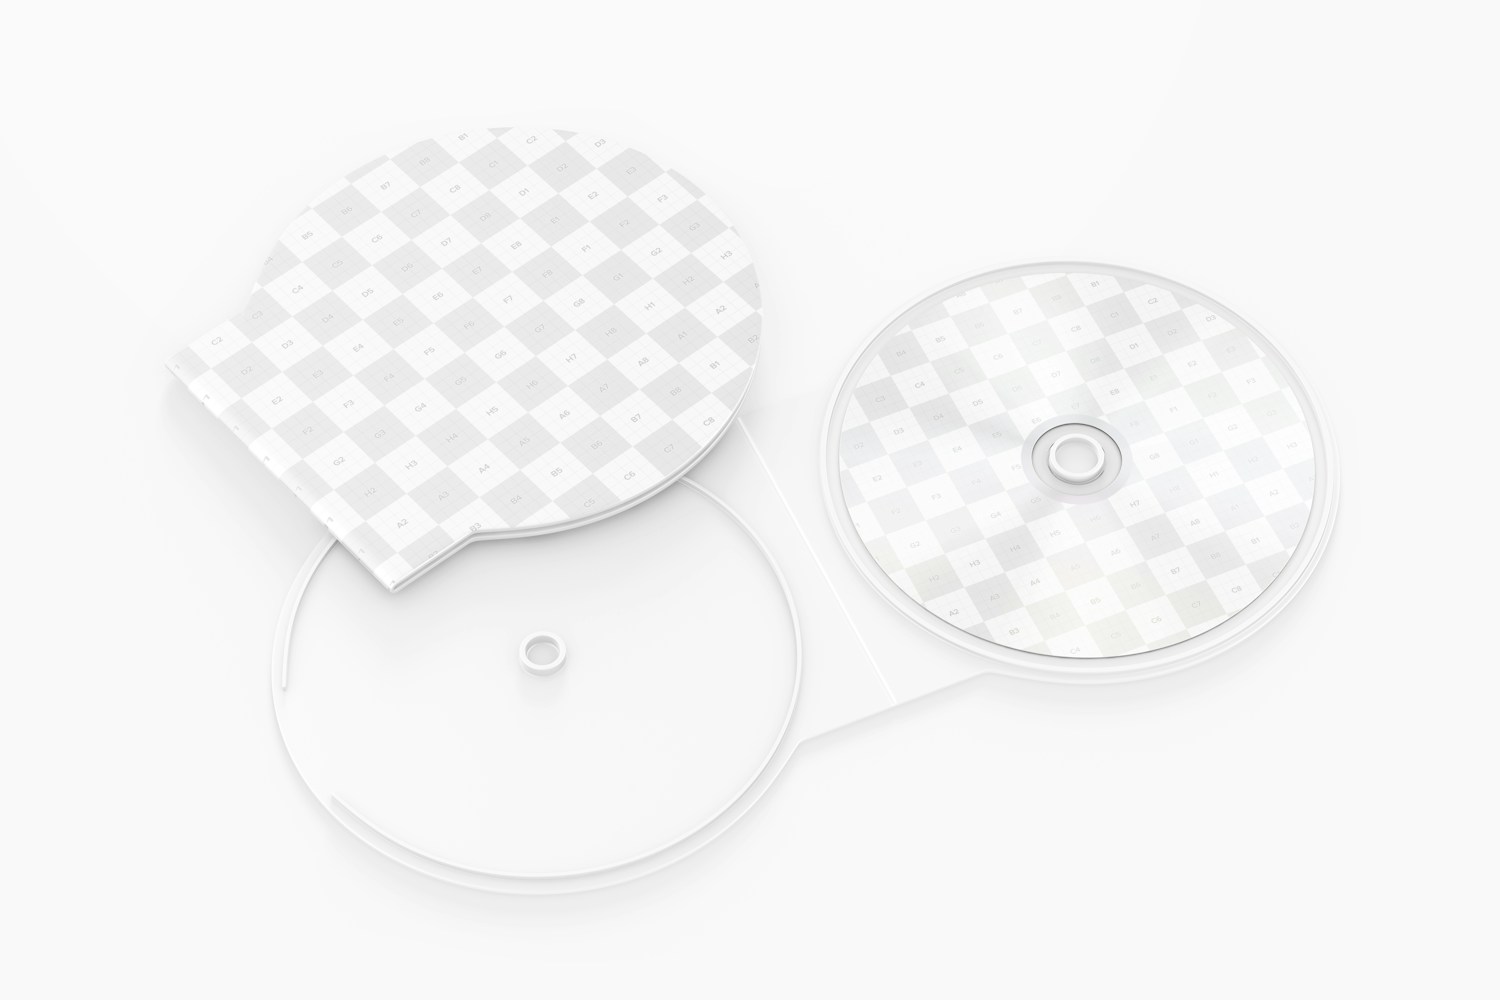 Round Plastic CD Cases Mockup, Opened and Closed